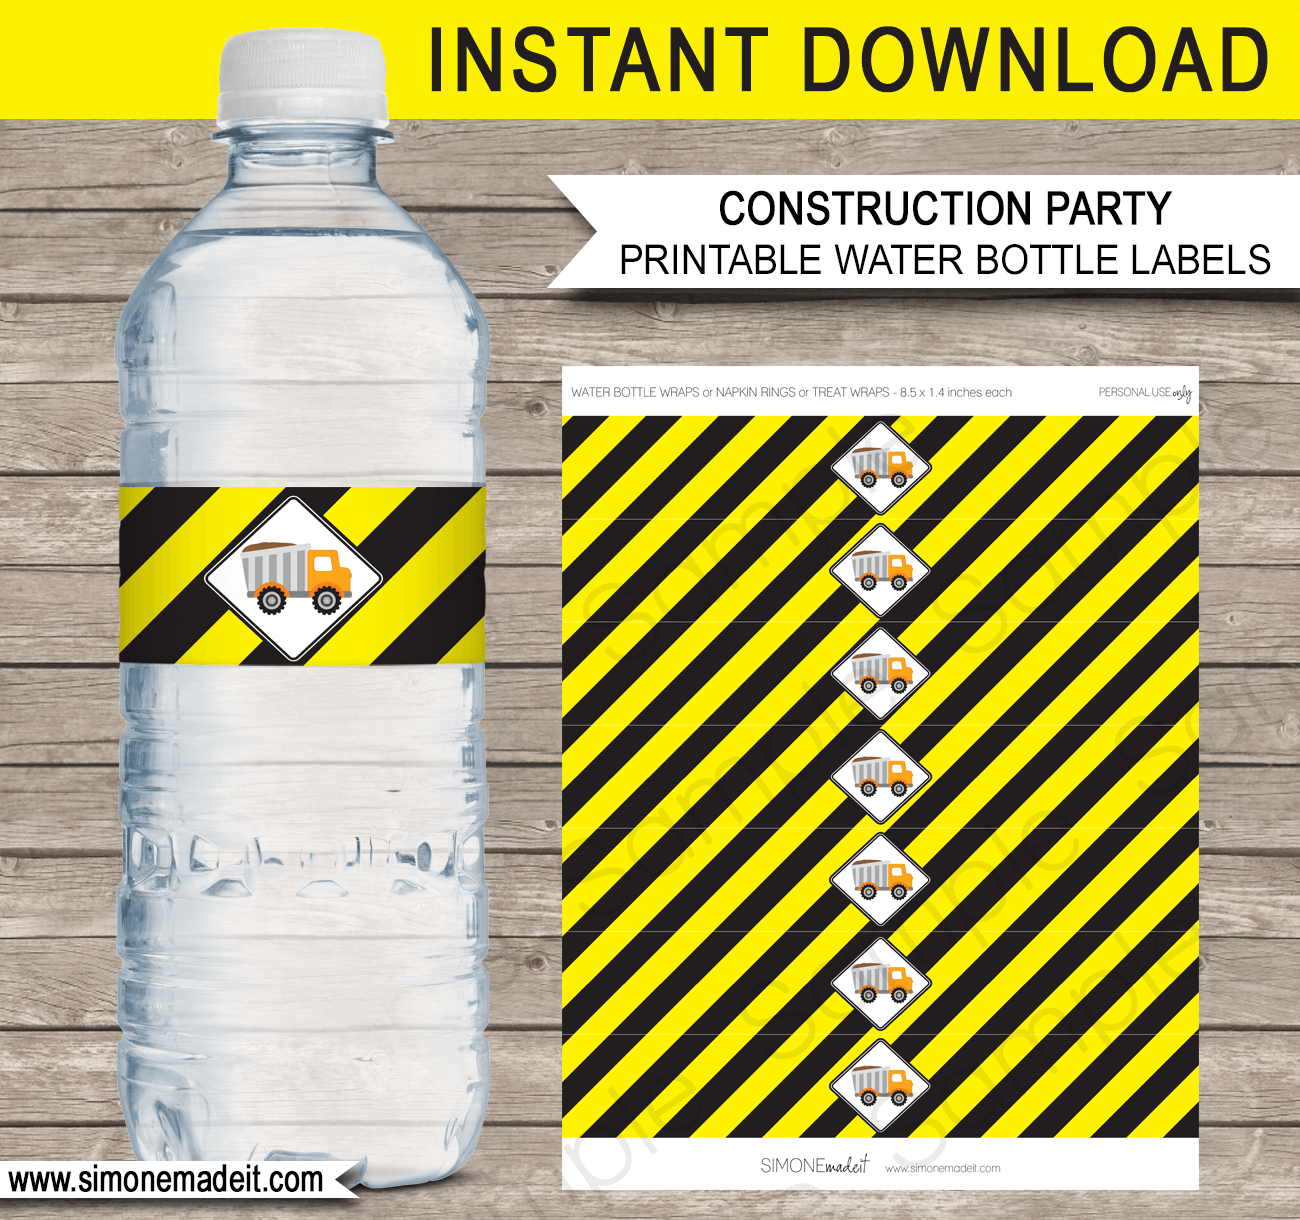 Construction Party Water Bottle Labels or Wrapper | Construction Birthday Party Theme Decorations | DIY Printable Template | INSTANT DOWNLOAD via simonemadeit.com